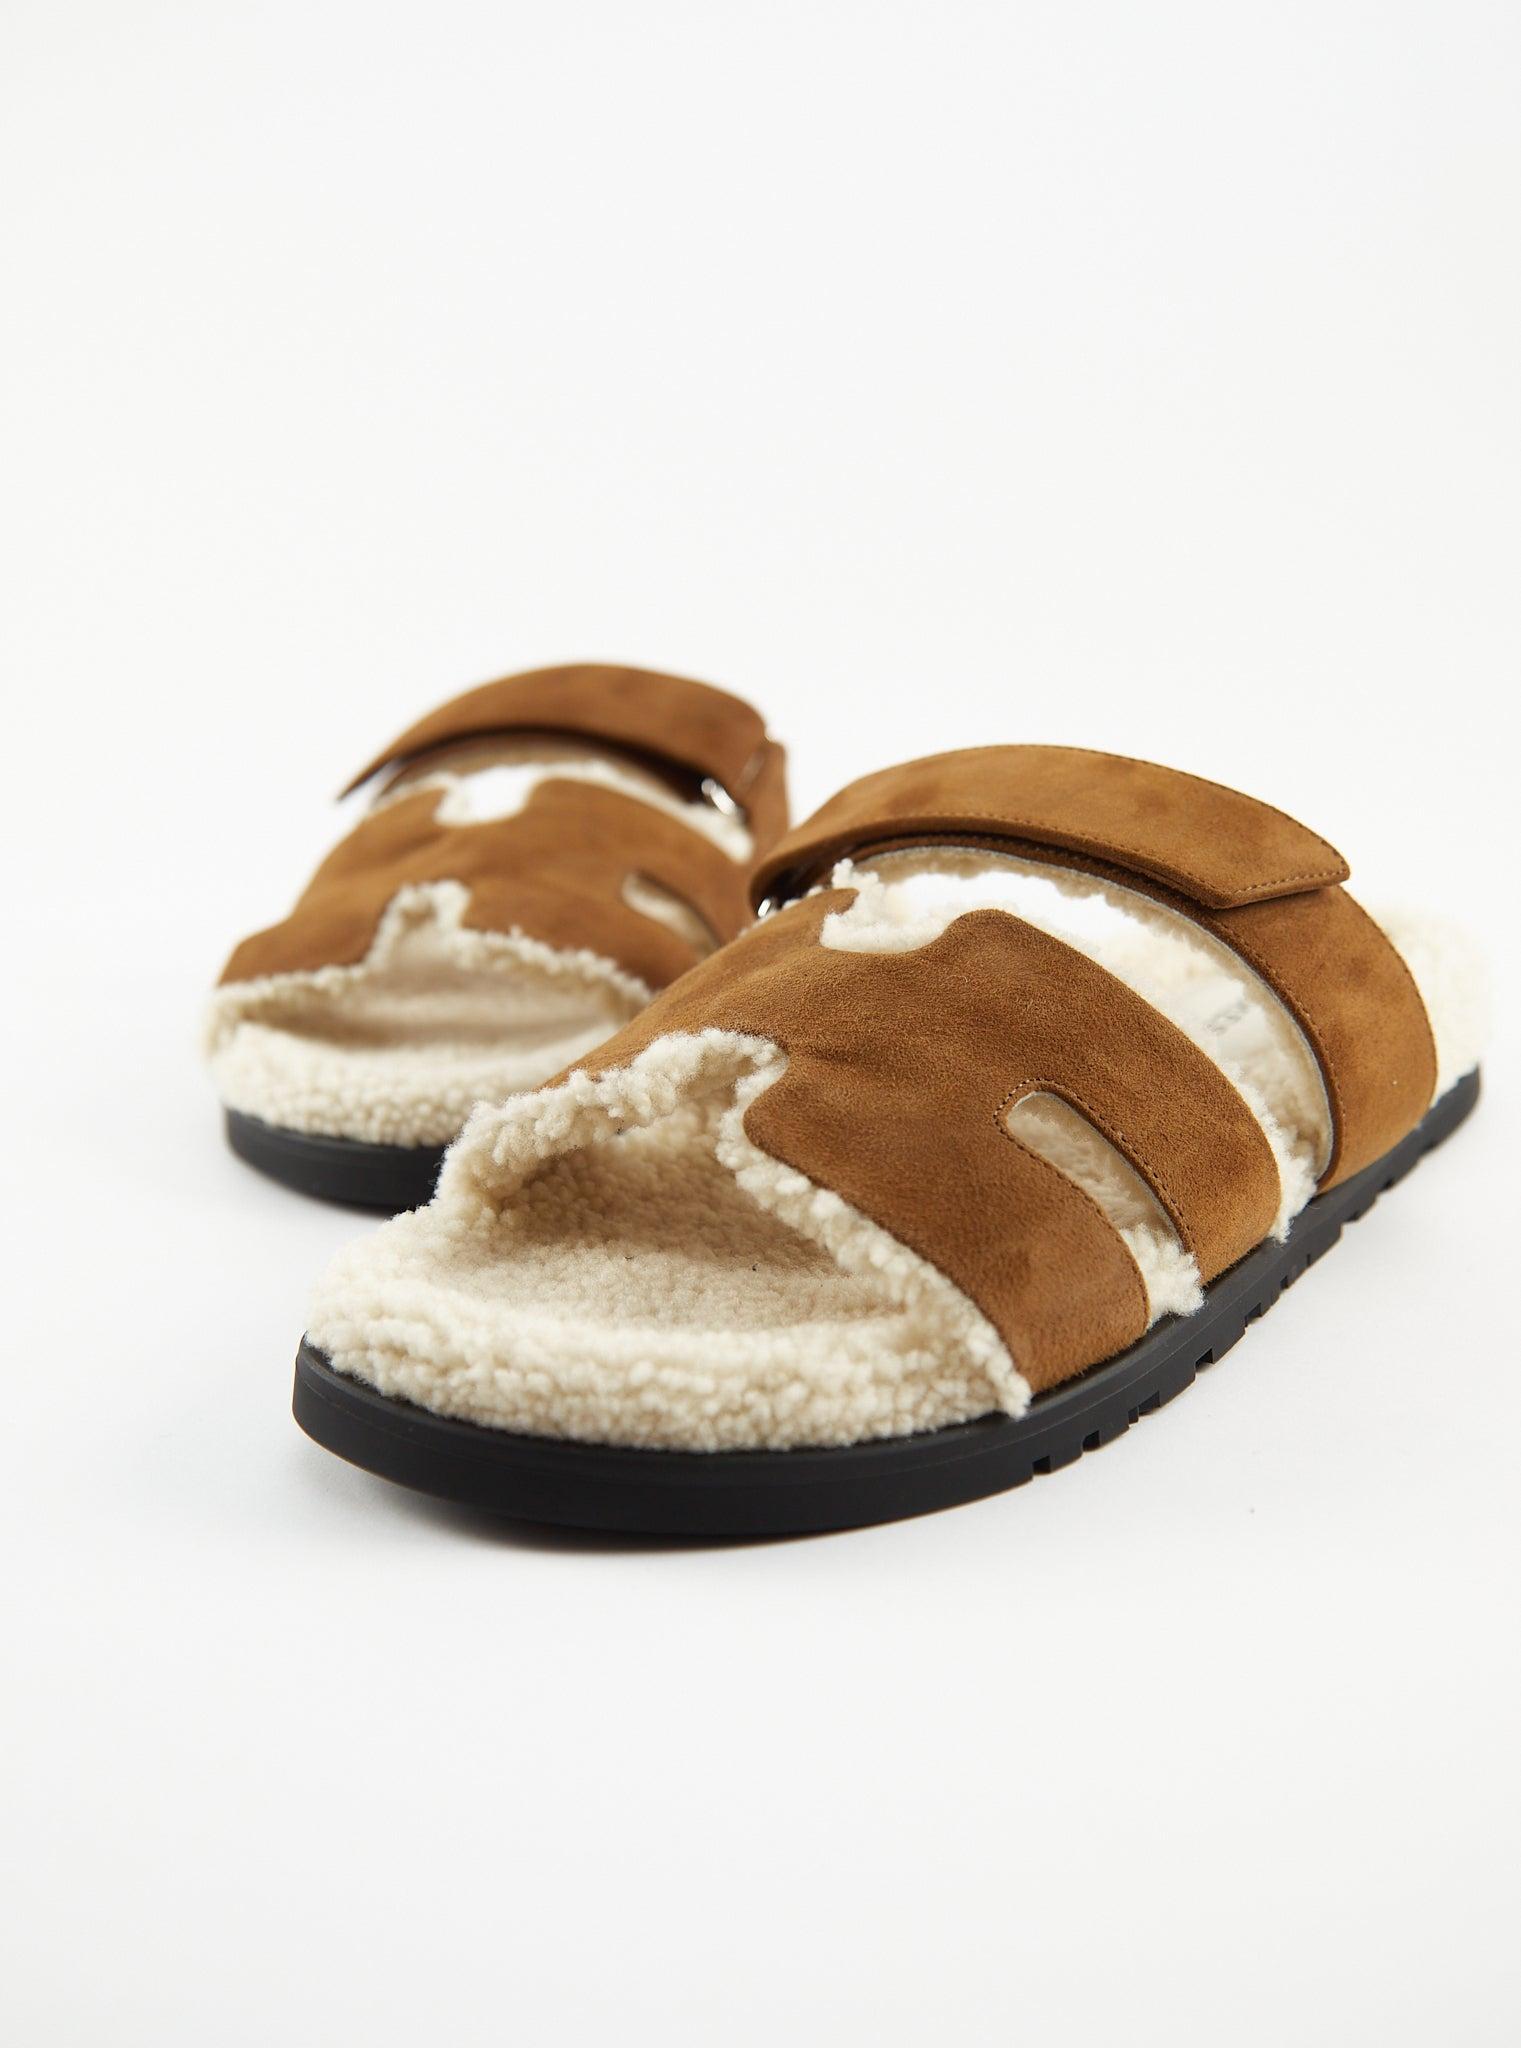 Hermès shearling Chypre techno-sandal in suede & woolskin with rubber sole and adjustable strap

Brun Fumé / Écru

Suede Upper

Natural Woolskin insole

Made in Italy 

Accompanied by: Hermès box, dust bags and ribbon

Men's Size 43.5

*Damaged box